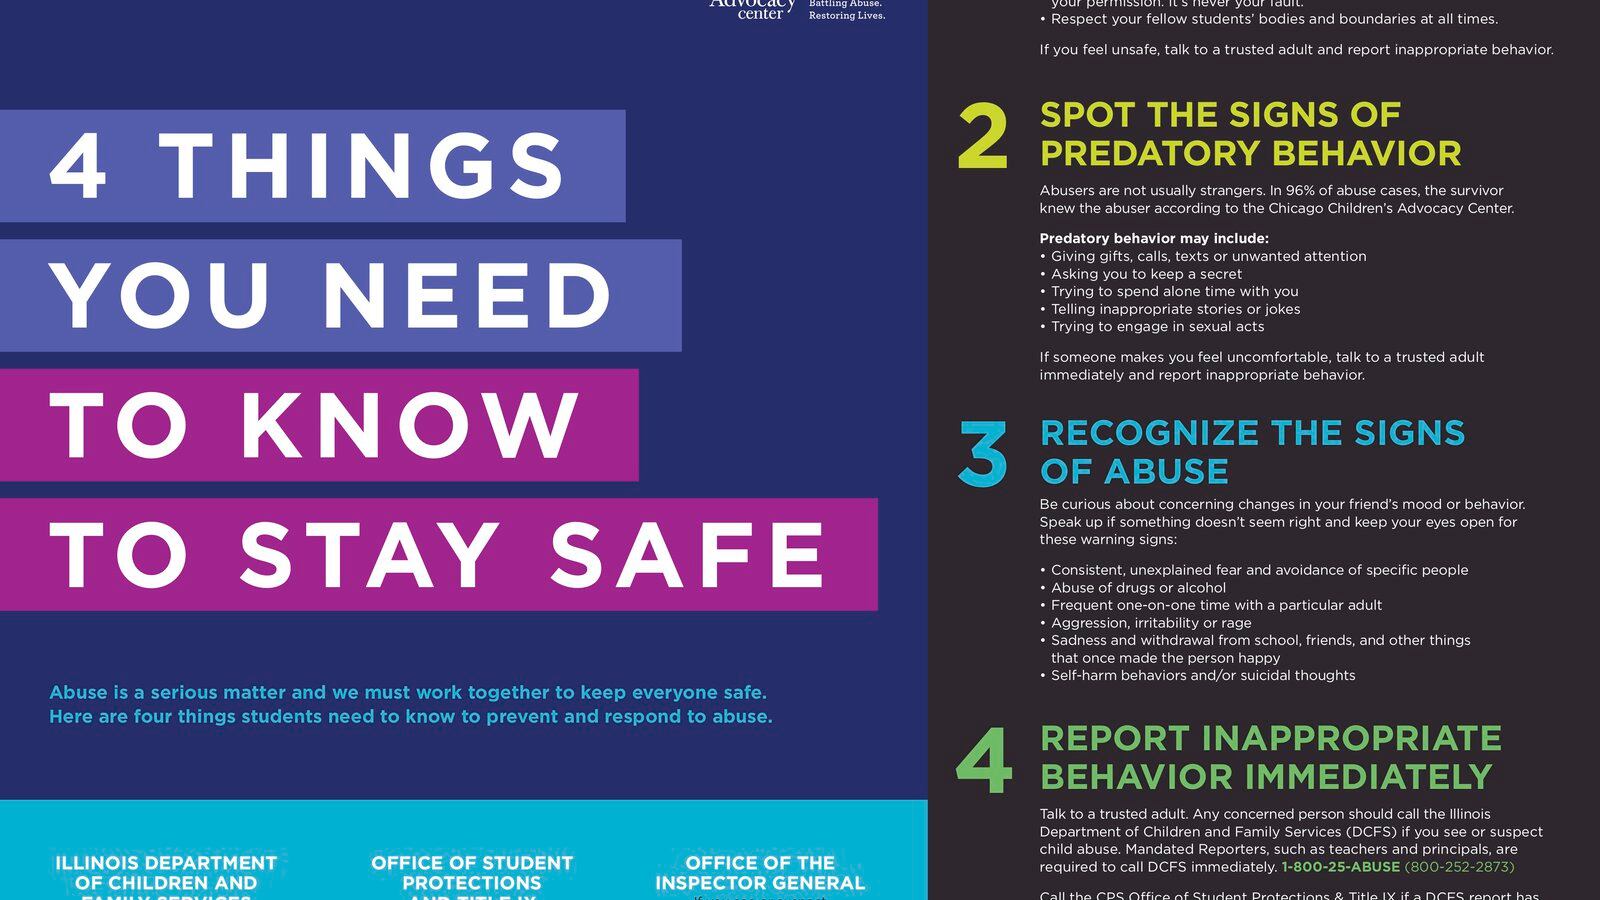 Last fall, Chicago schools kicked off a poster campaign that spells out how to report suspected abuse.